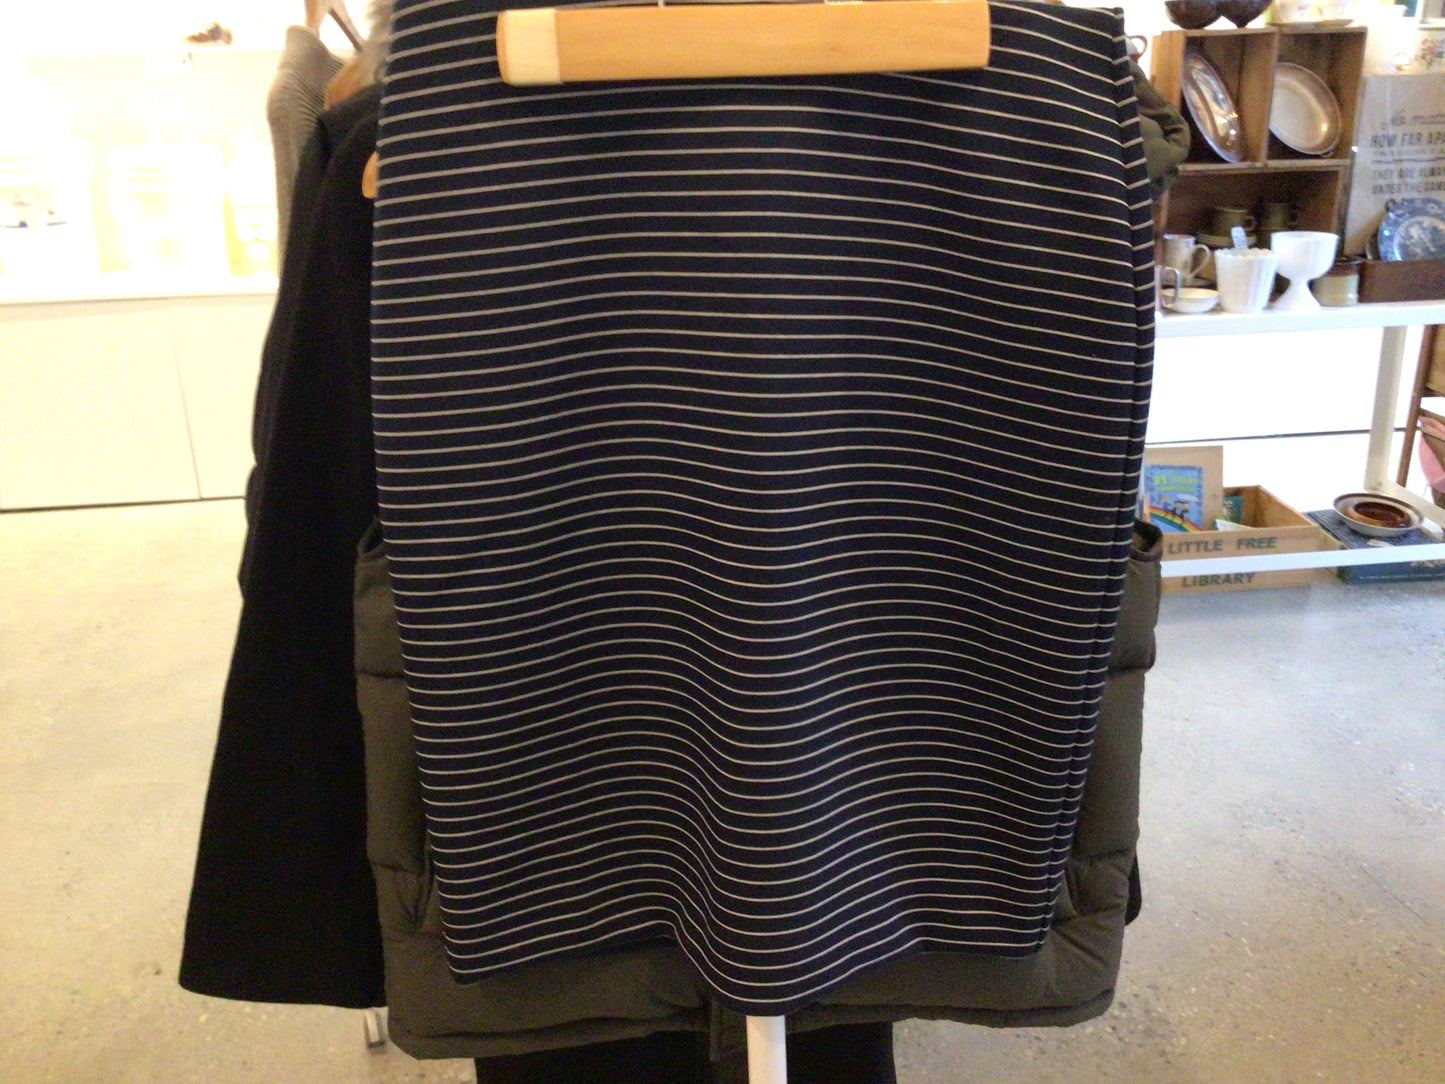 Consignment 4606-13 Banana Republic navy/white striped skirt. Size S.